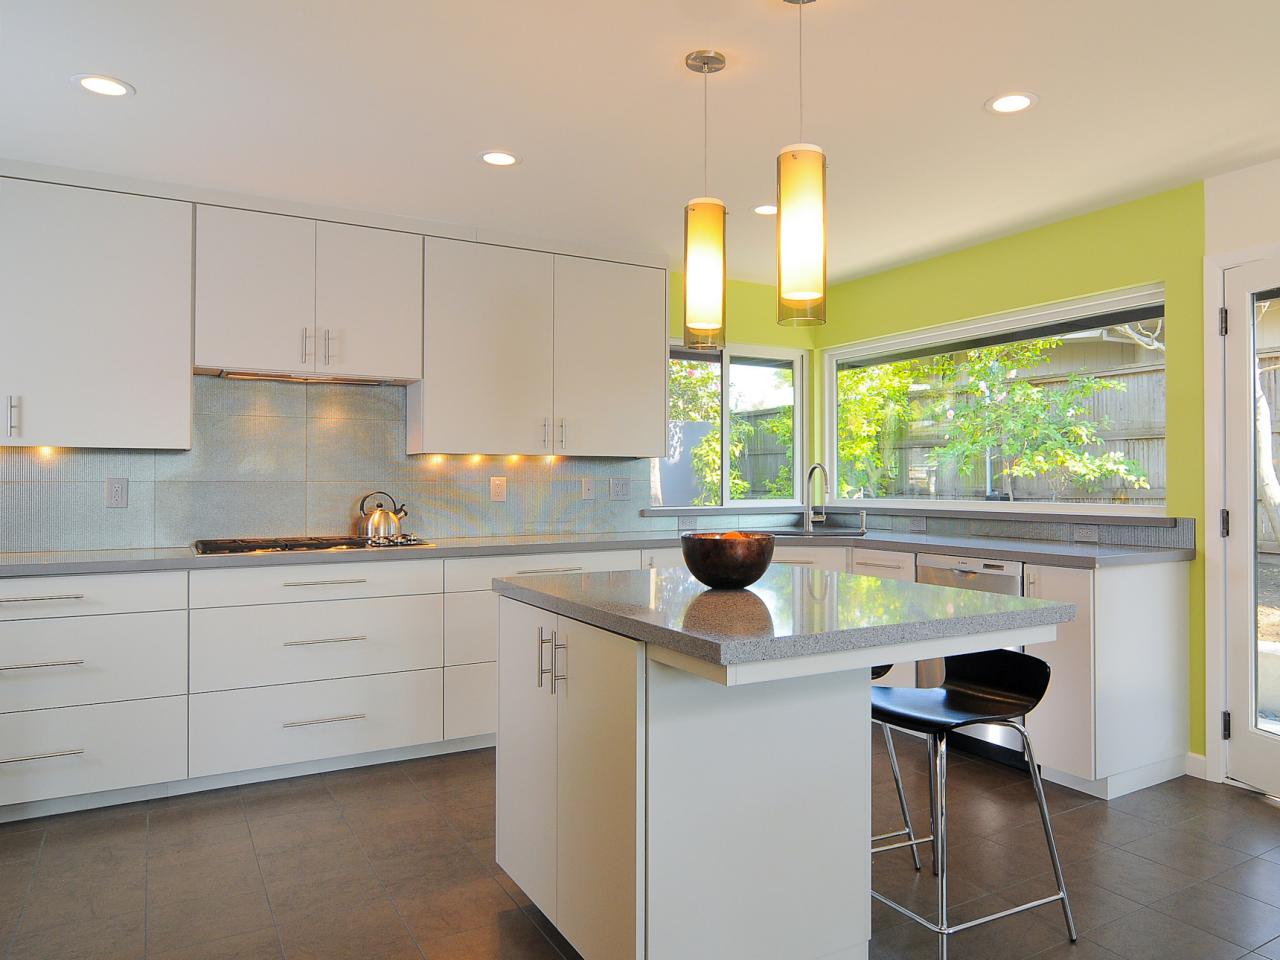 semi-custom kitchen cabinets: pictures, options, tips